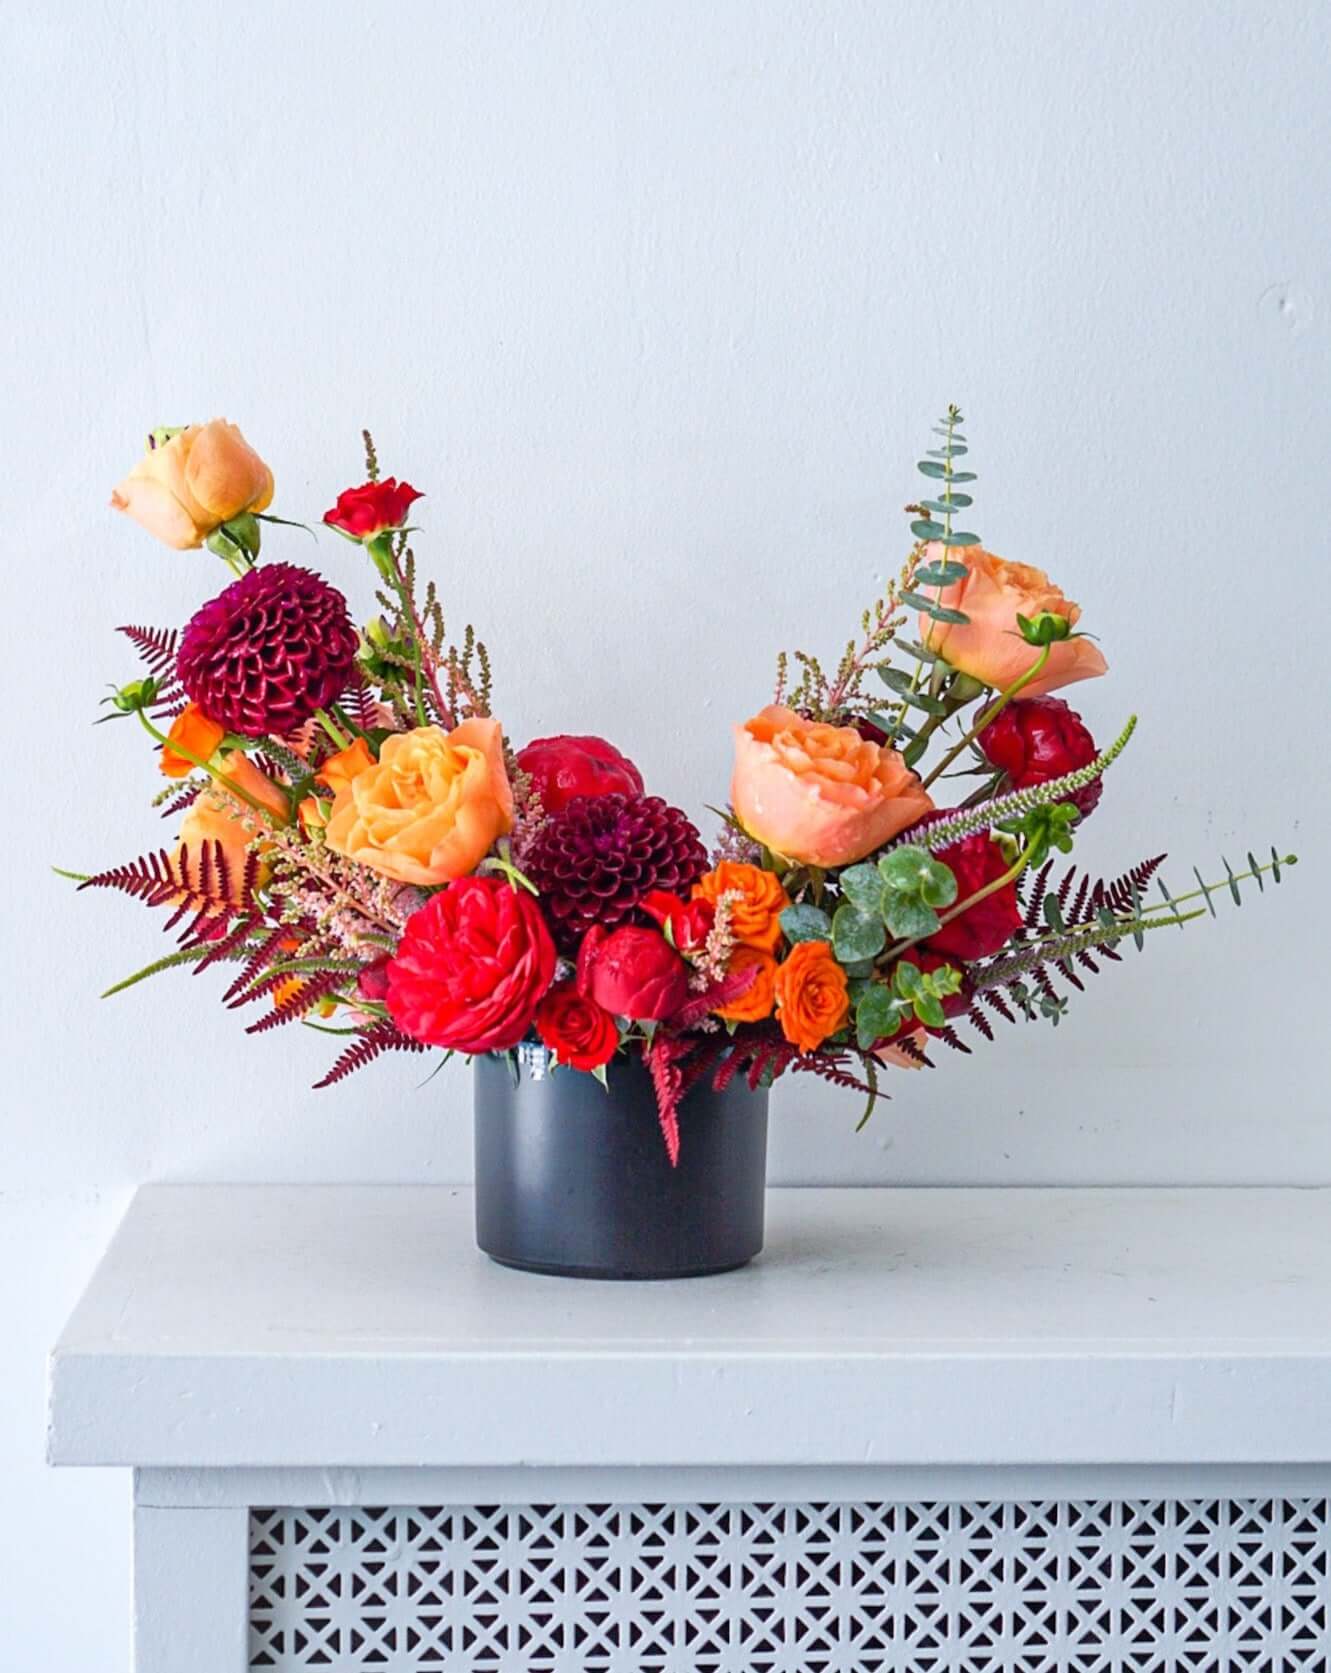 Mon Cheri is a perfect gift to your sweetheart. This arrangement has a bold colour palette of deep red, orange and touch of pink. Featuring local red garden roses, orange roses, dahlias, mini roses, and pink astilbe. 